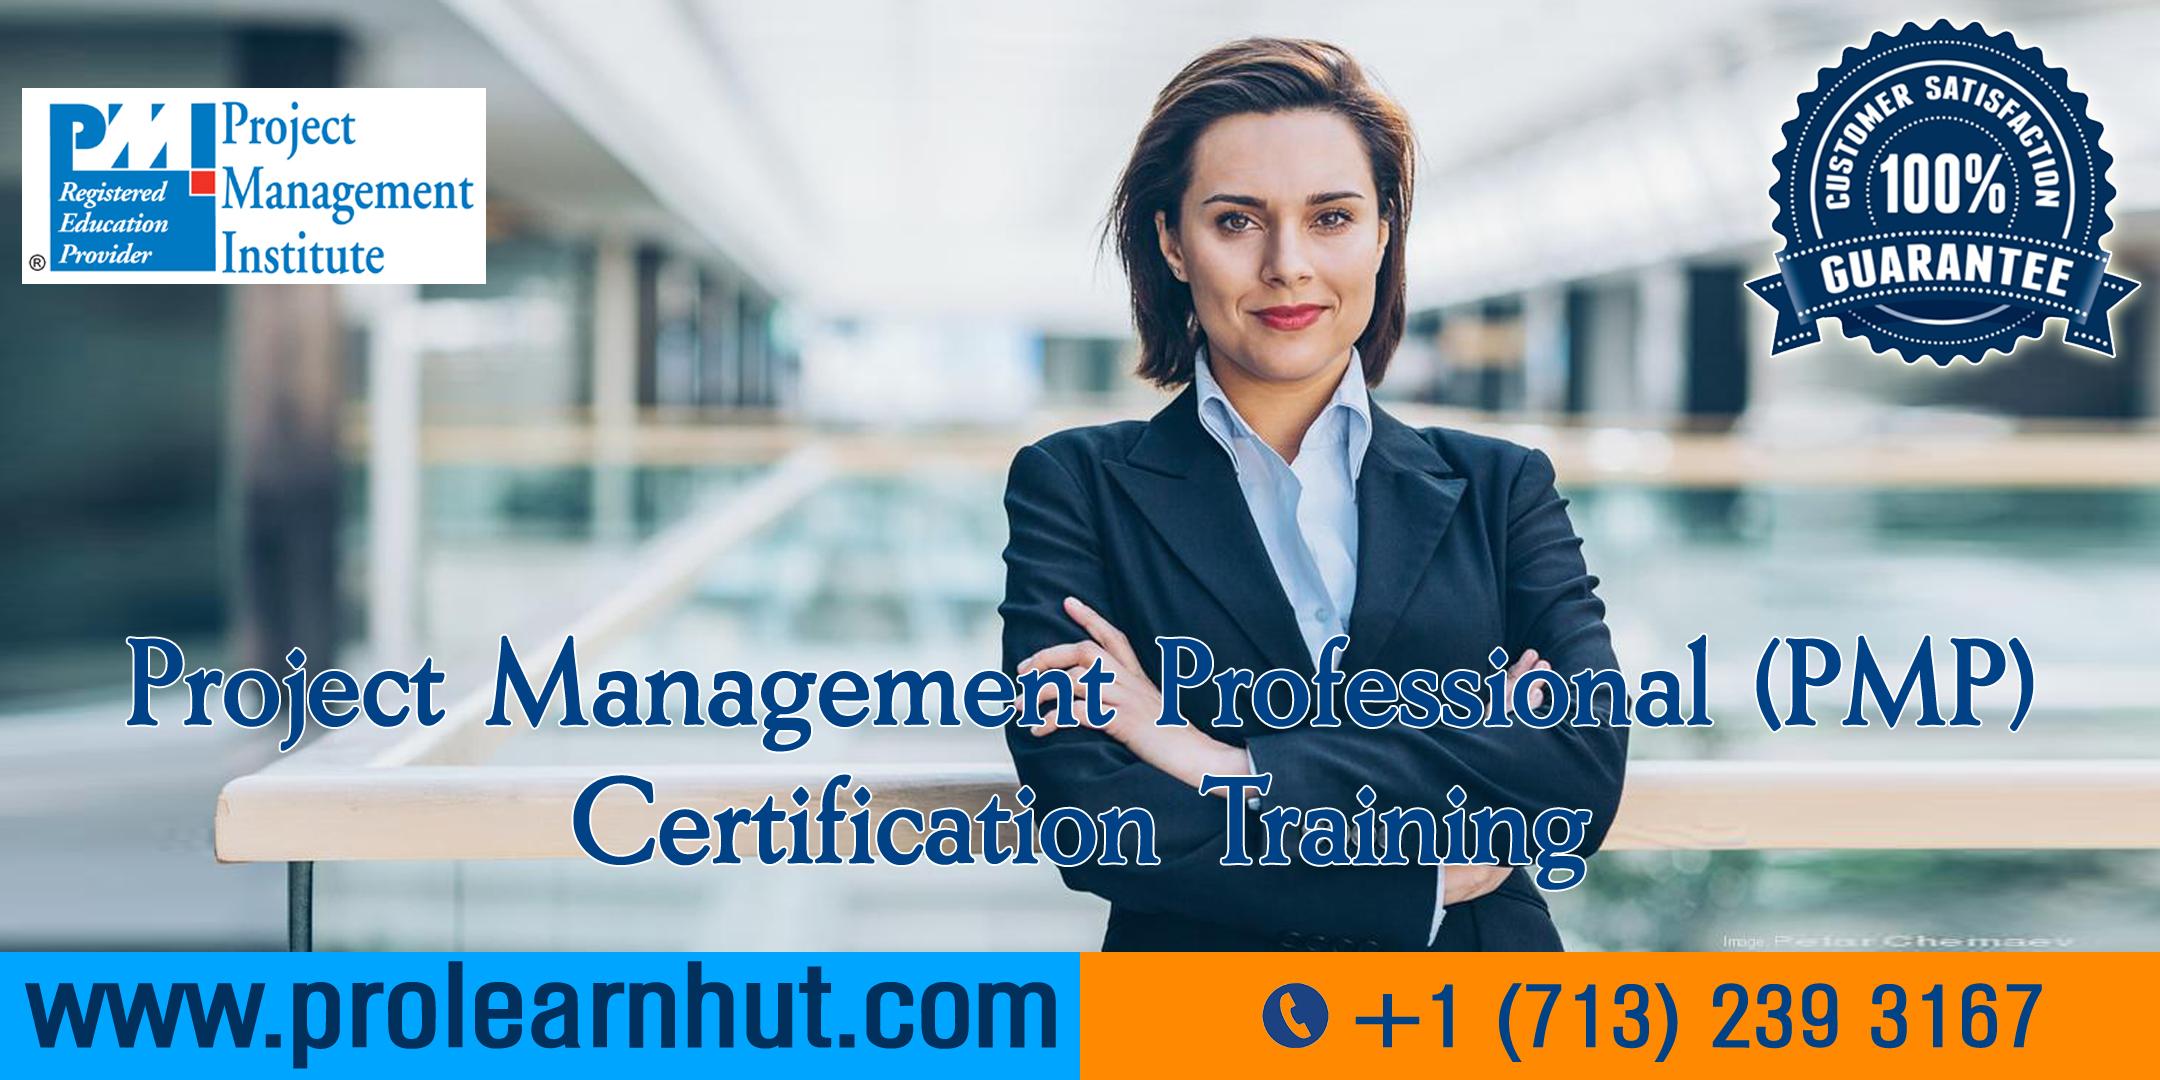 PMP Certification | Project Management Certification| PMP Training in Oceanside, CA | ProLearnHut